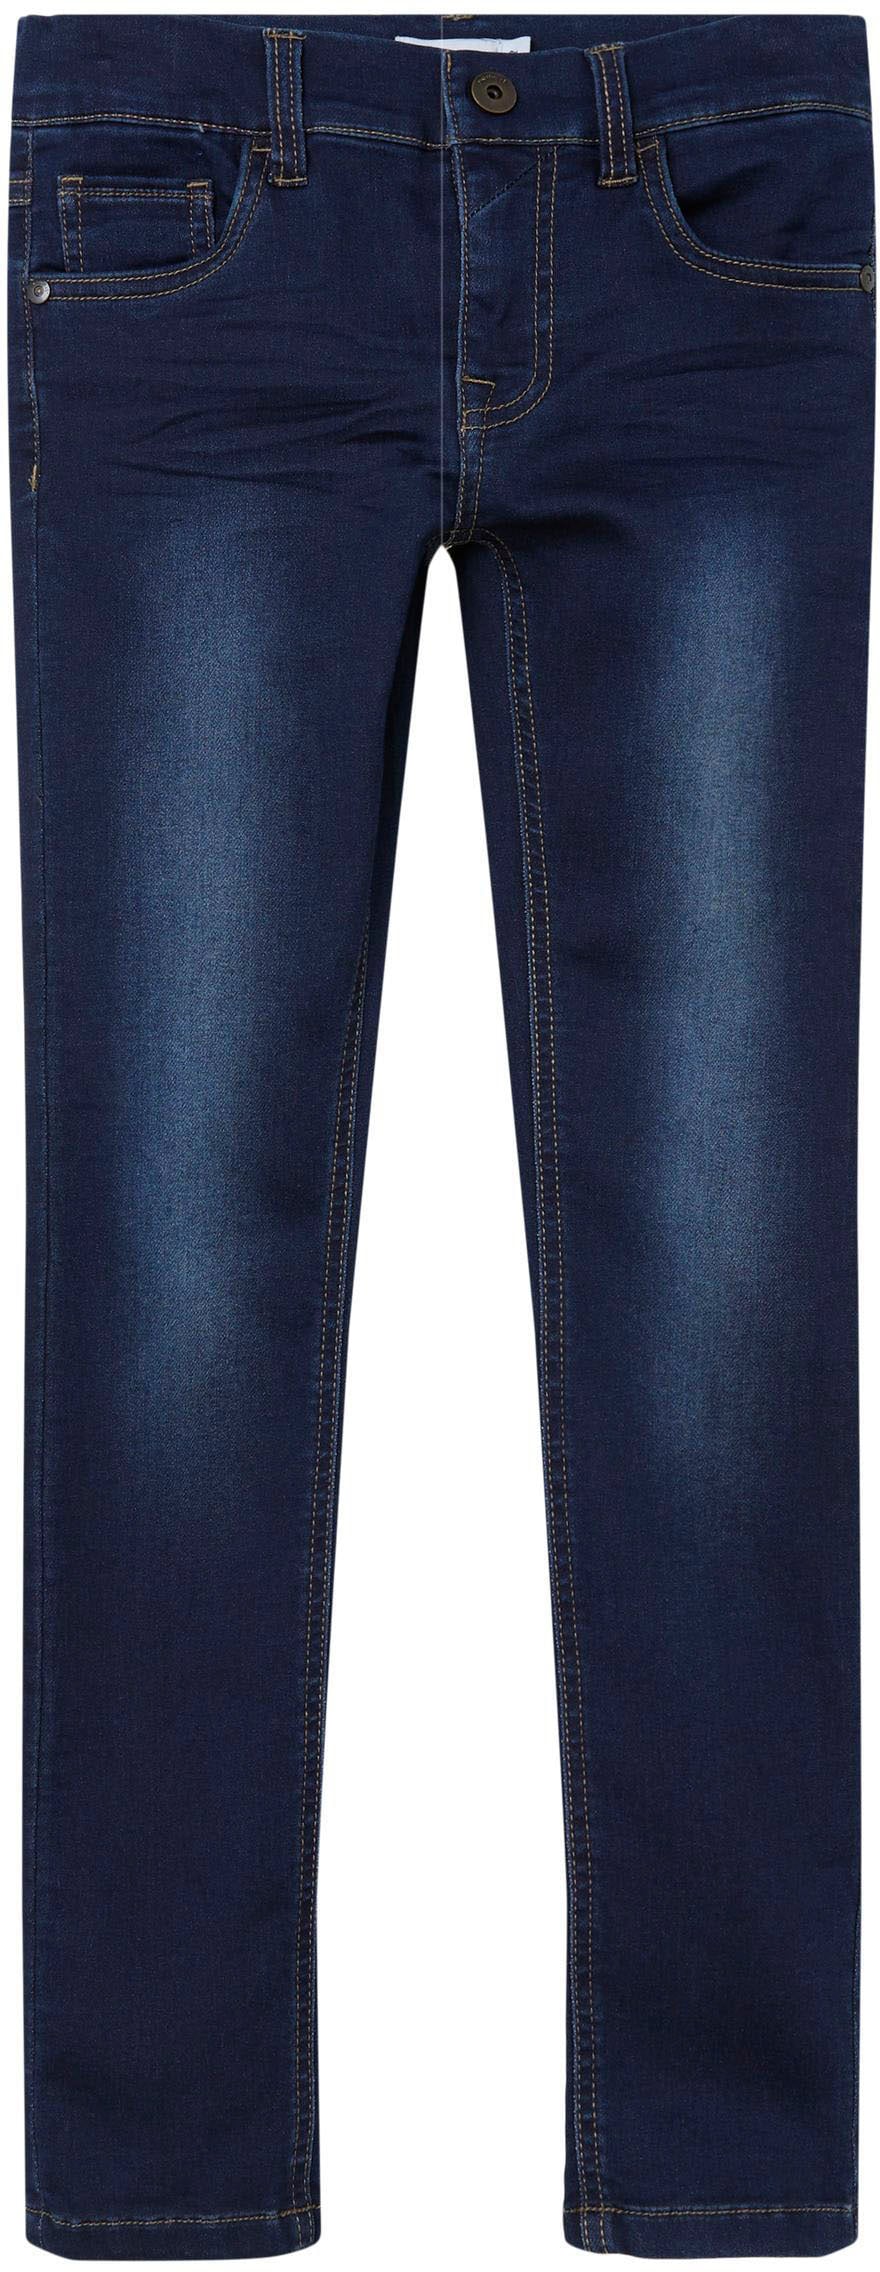 bei »NKMTHEO Stretch-Jeans PANT« DNMTHAYER ♕ It SWE COR1 Name